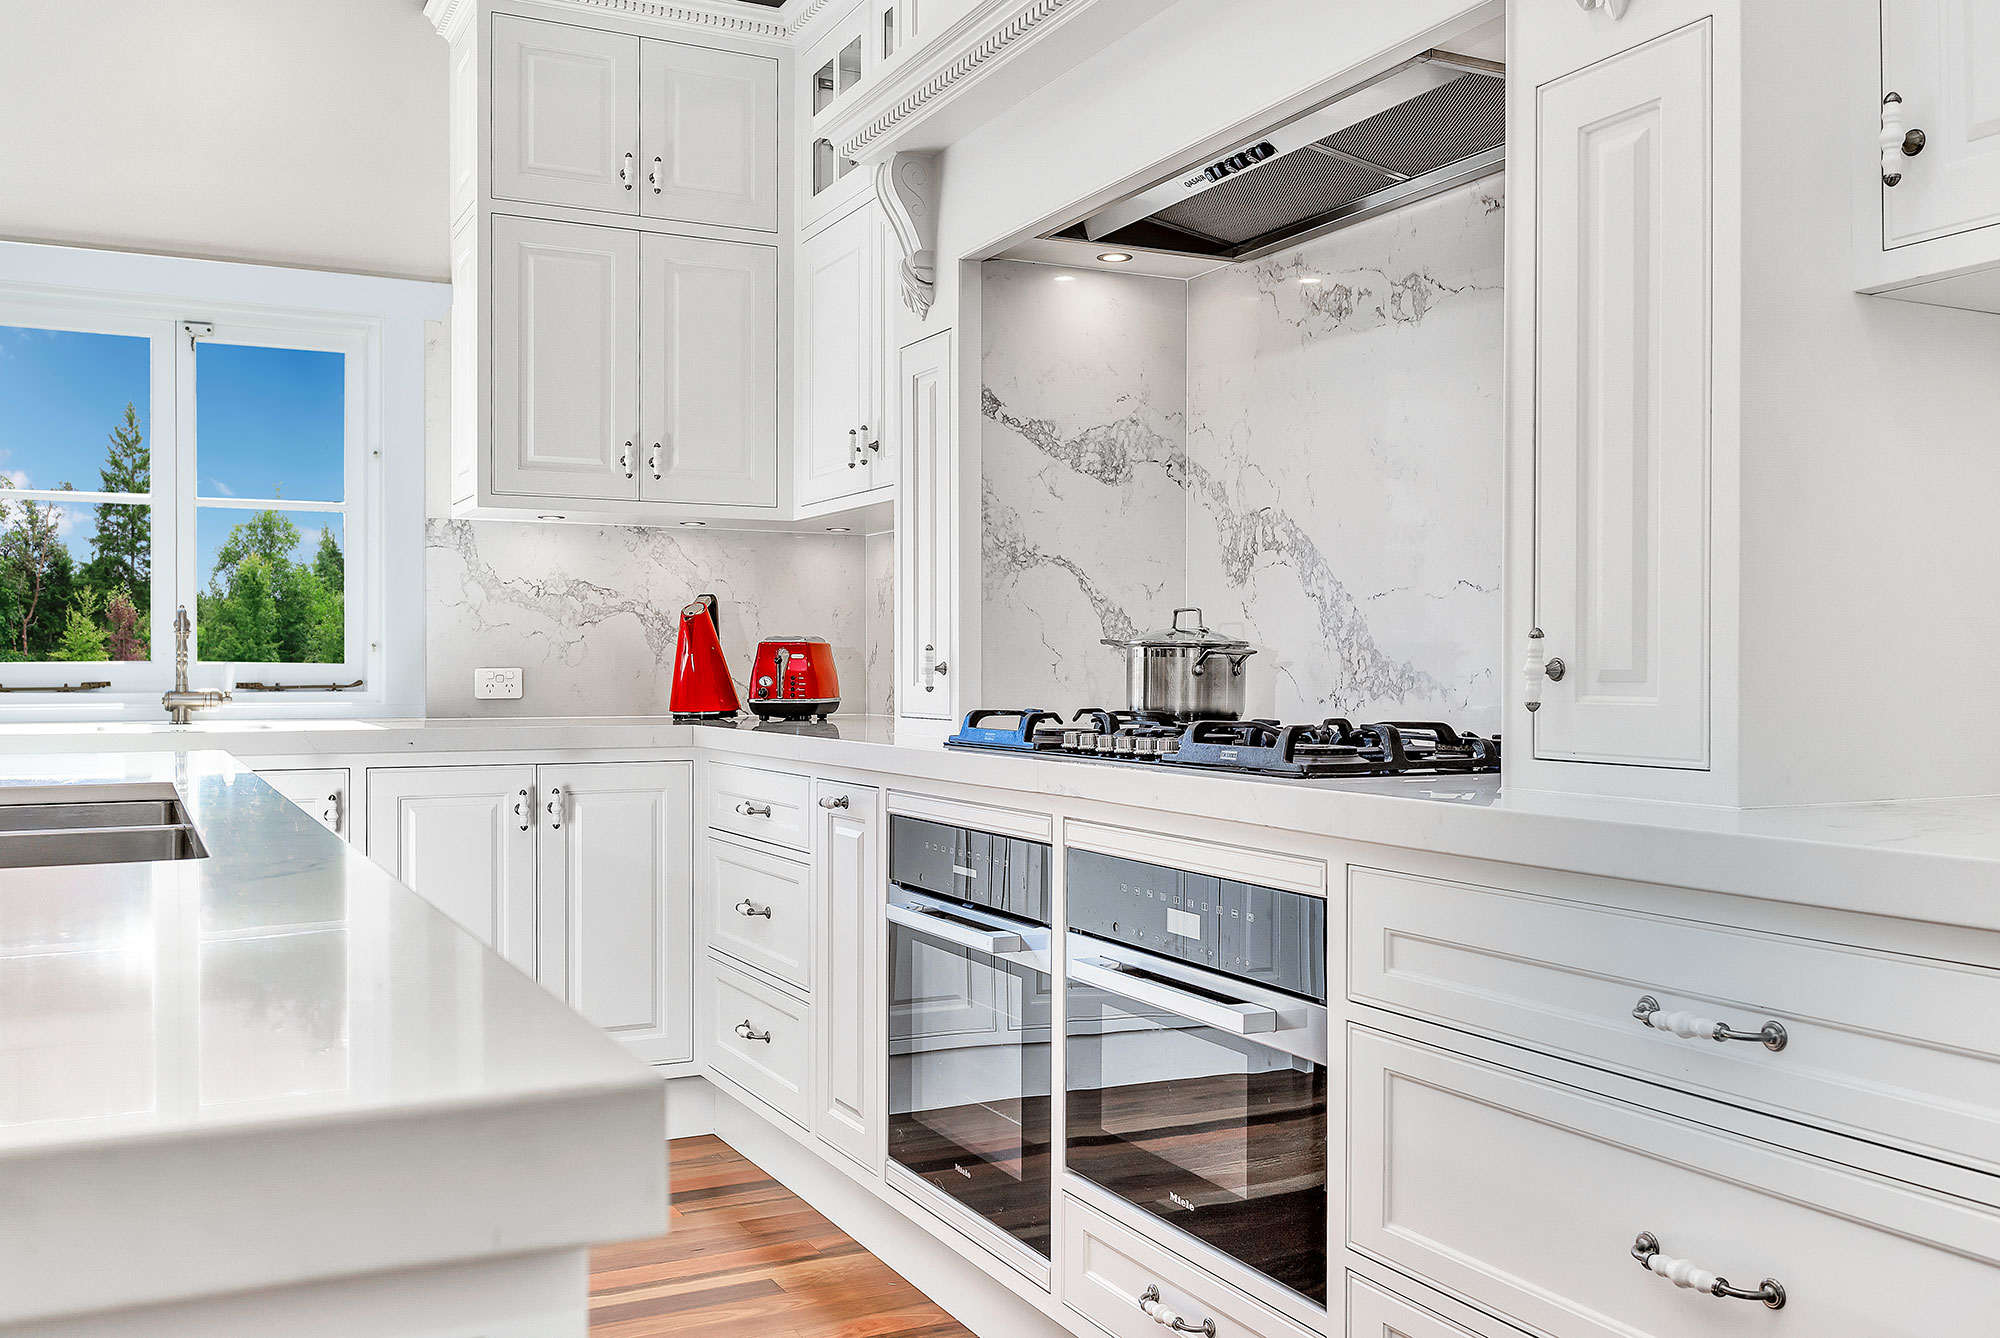 A spacious and bright kitchen with white cabinets, subway tile backsplash, and an island with a wooden countertop